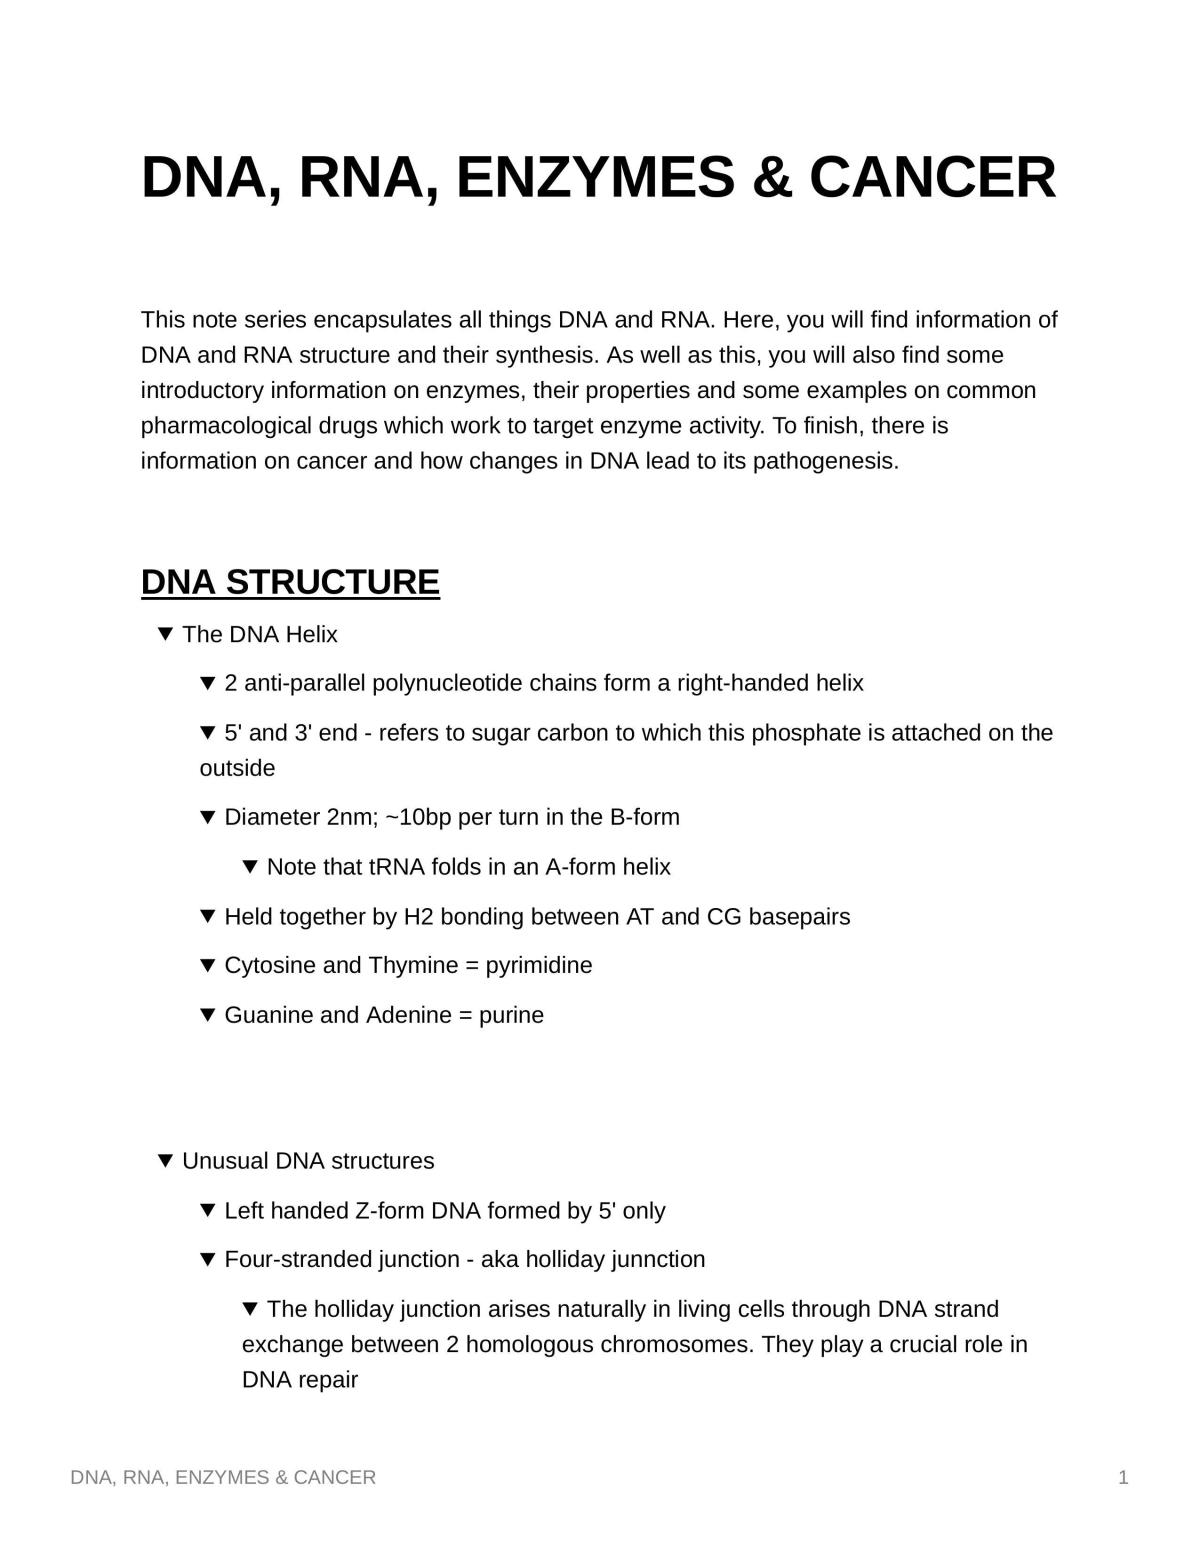 DNA, RNA, Enzymes and Cancer - Page 1